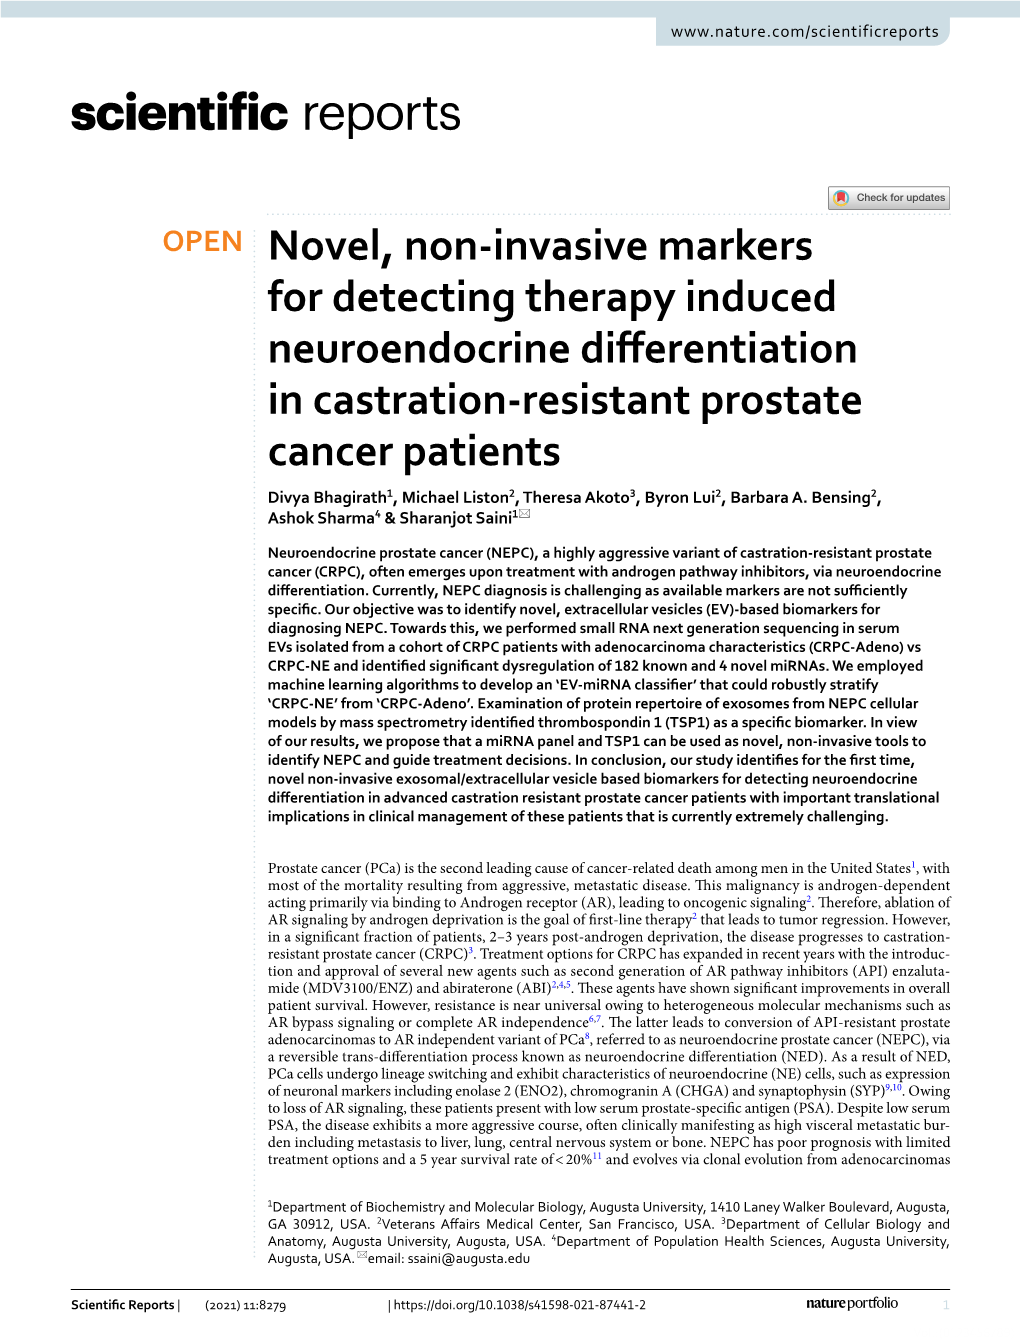 Novel, Non-Invasive Markers for Detecting Therapy Induced